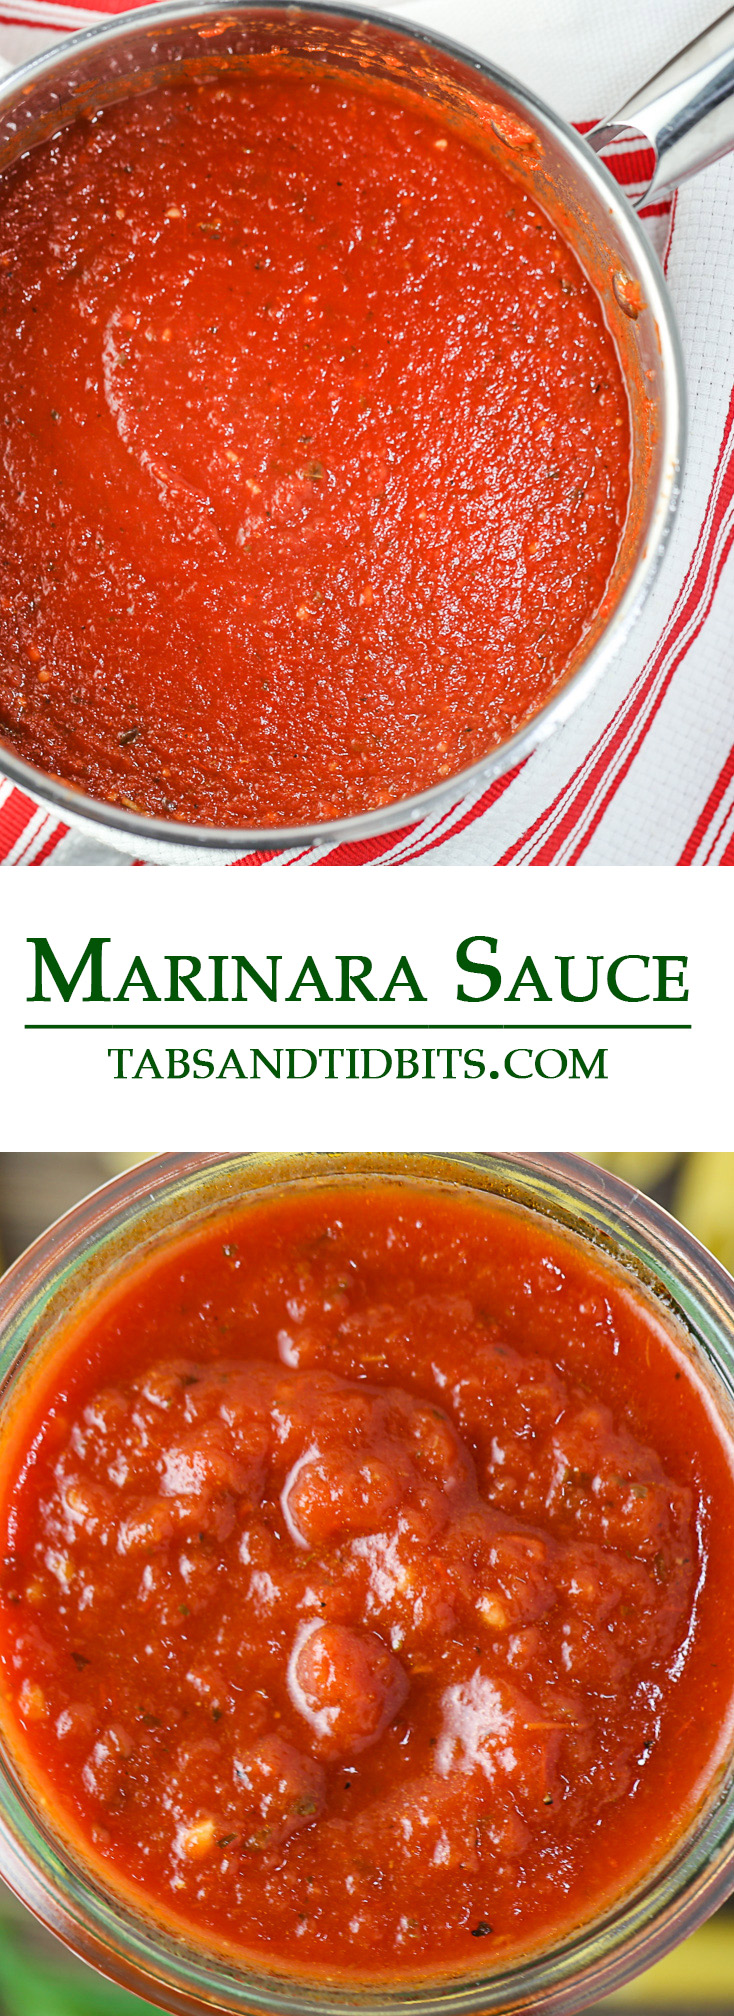 This simple and uncomplicated marinara sauce adds bright and fresh flavors!